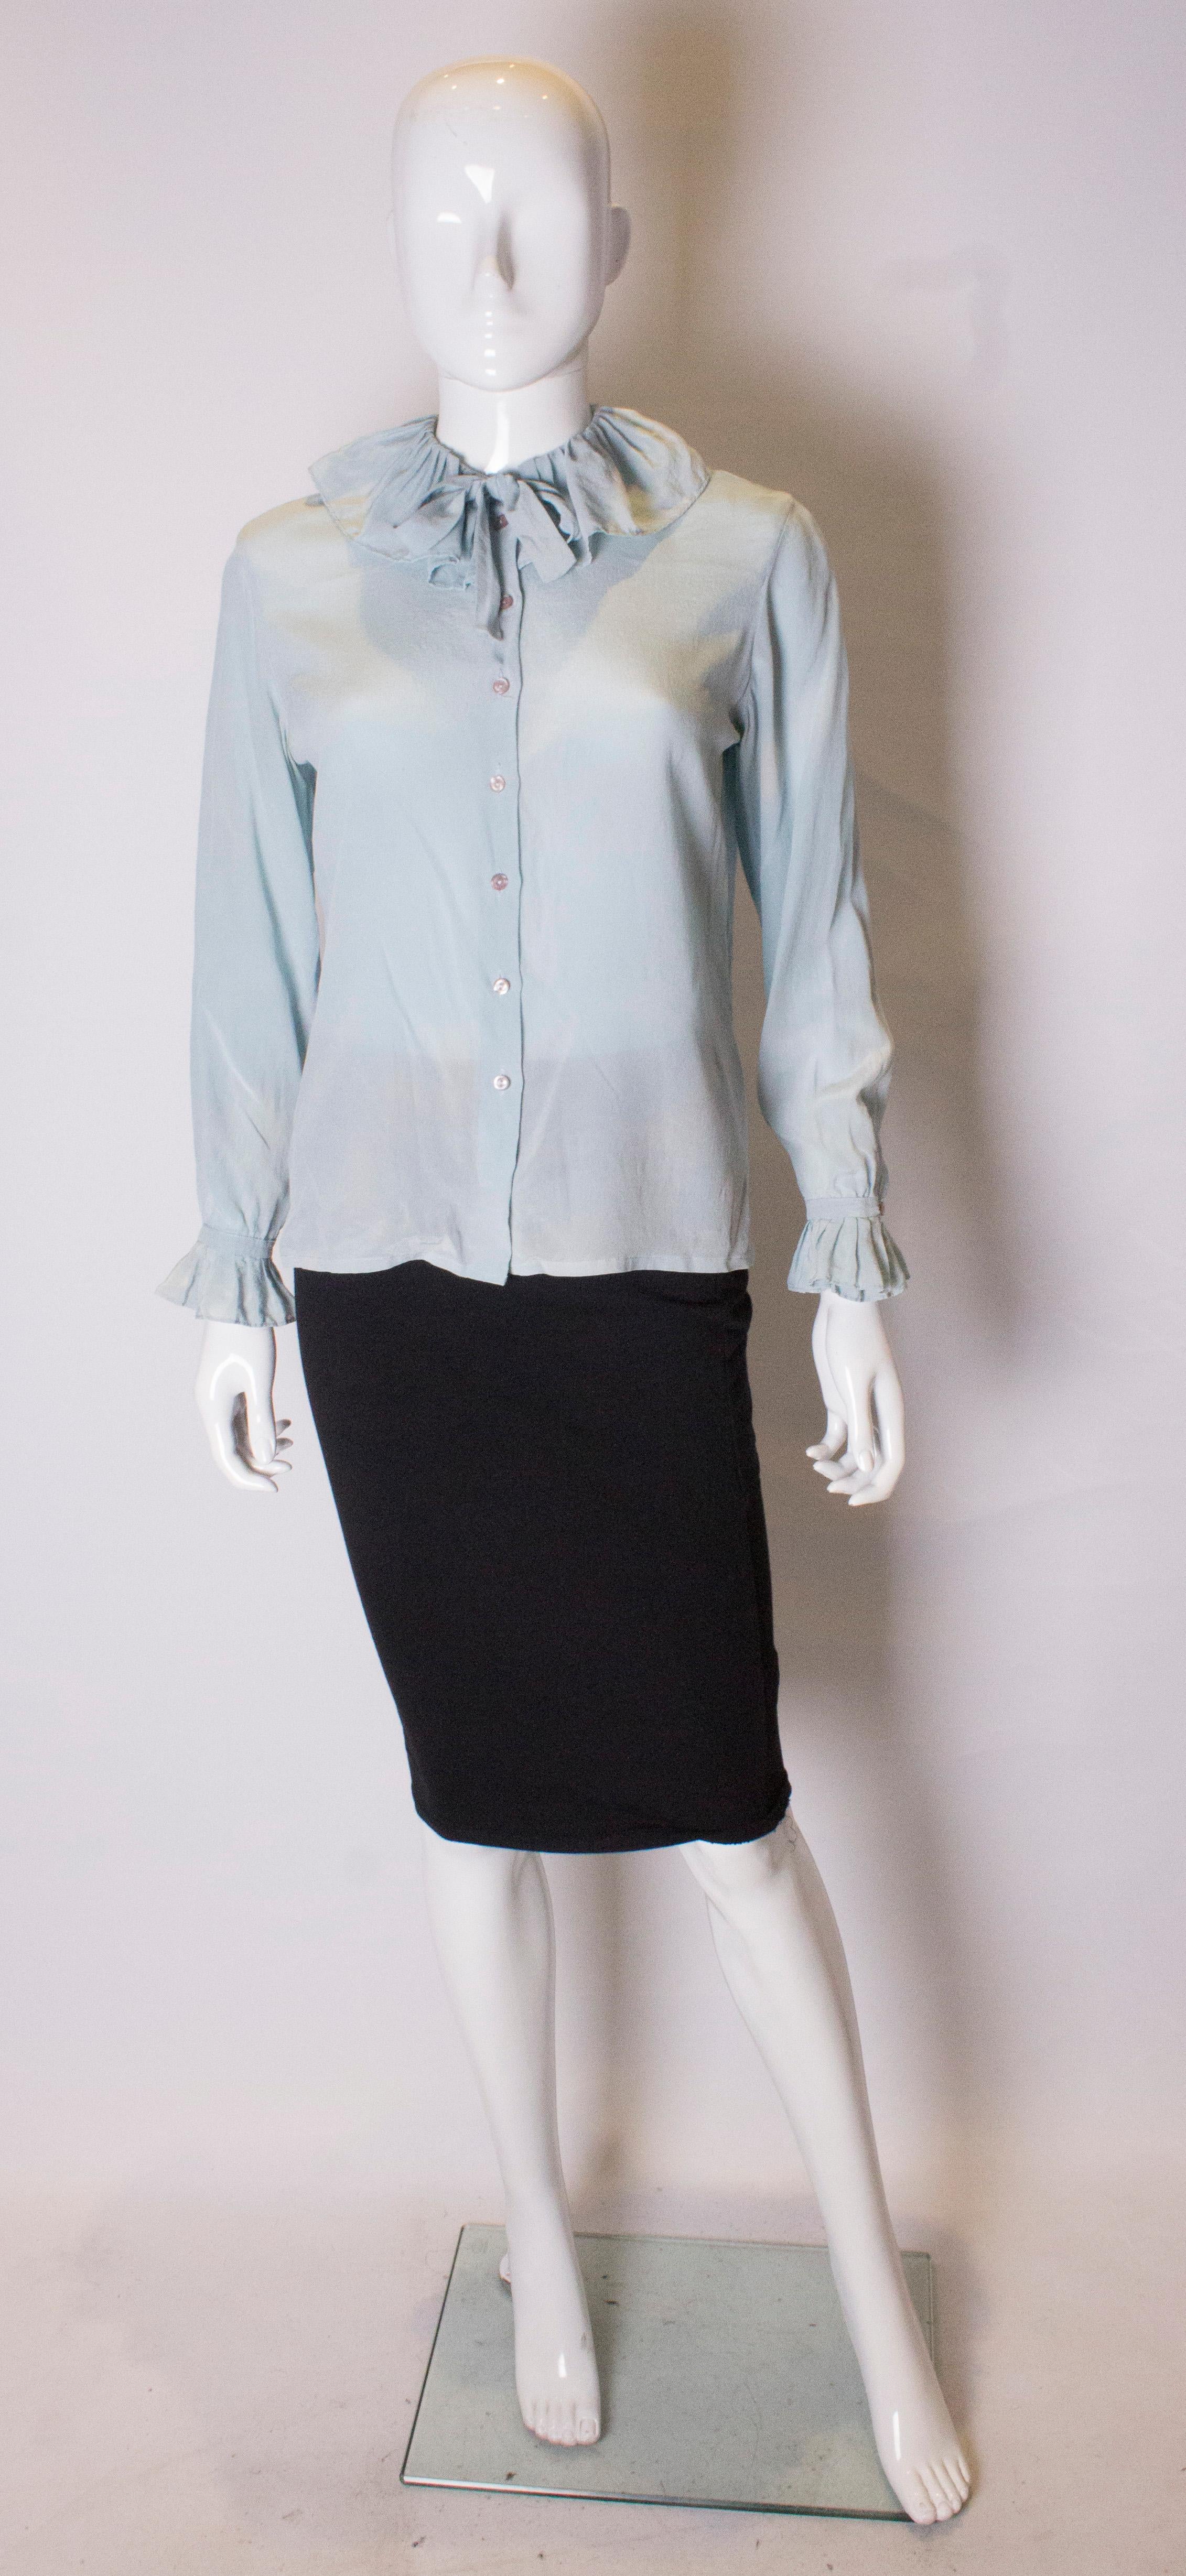 A pretty silk blouse by Dana Cote d'Azur. In a pretty pale blue colour  the blouse has a button front openging and cuffs with a frill neck and short tie .